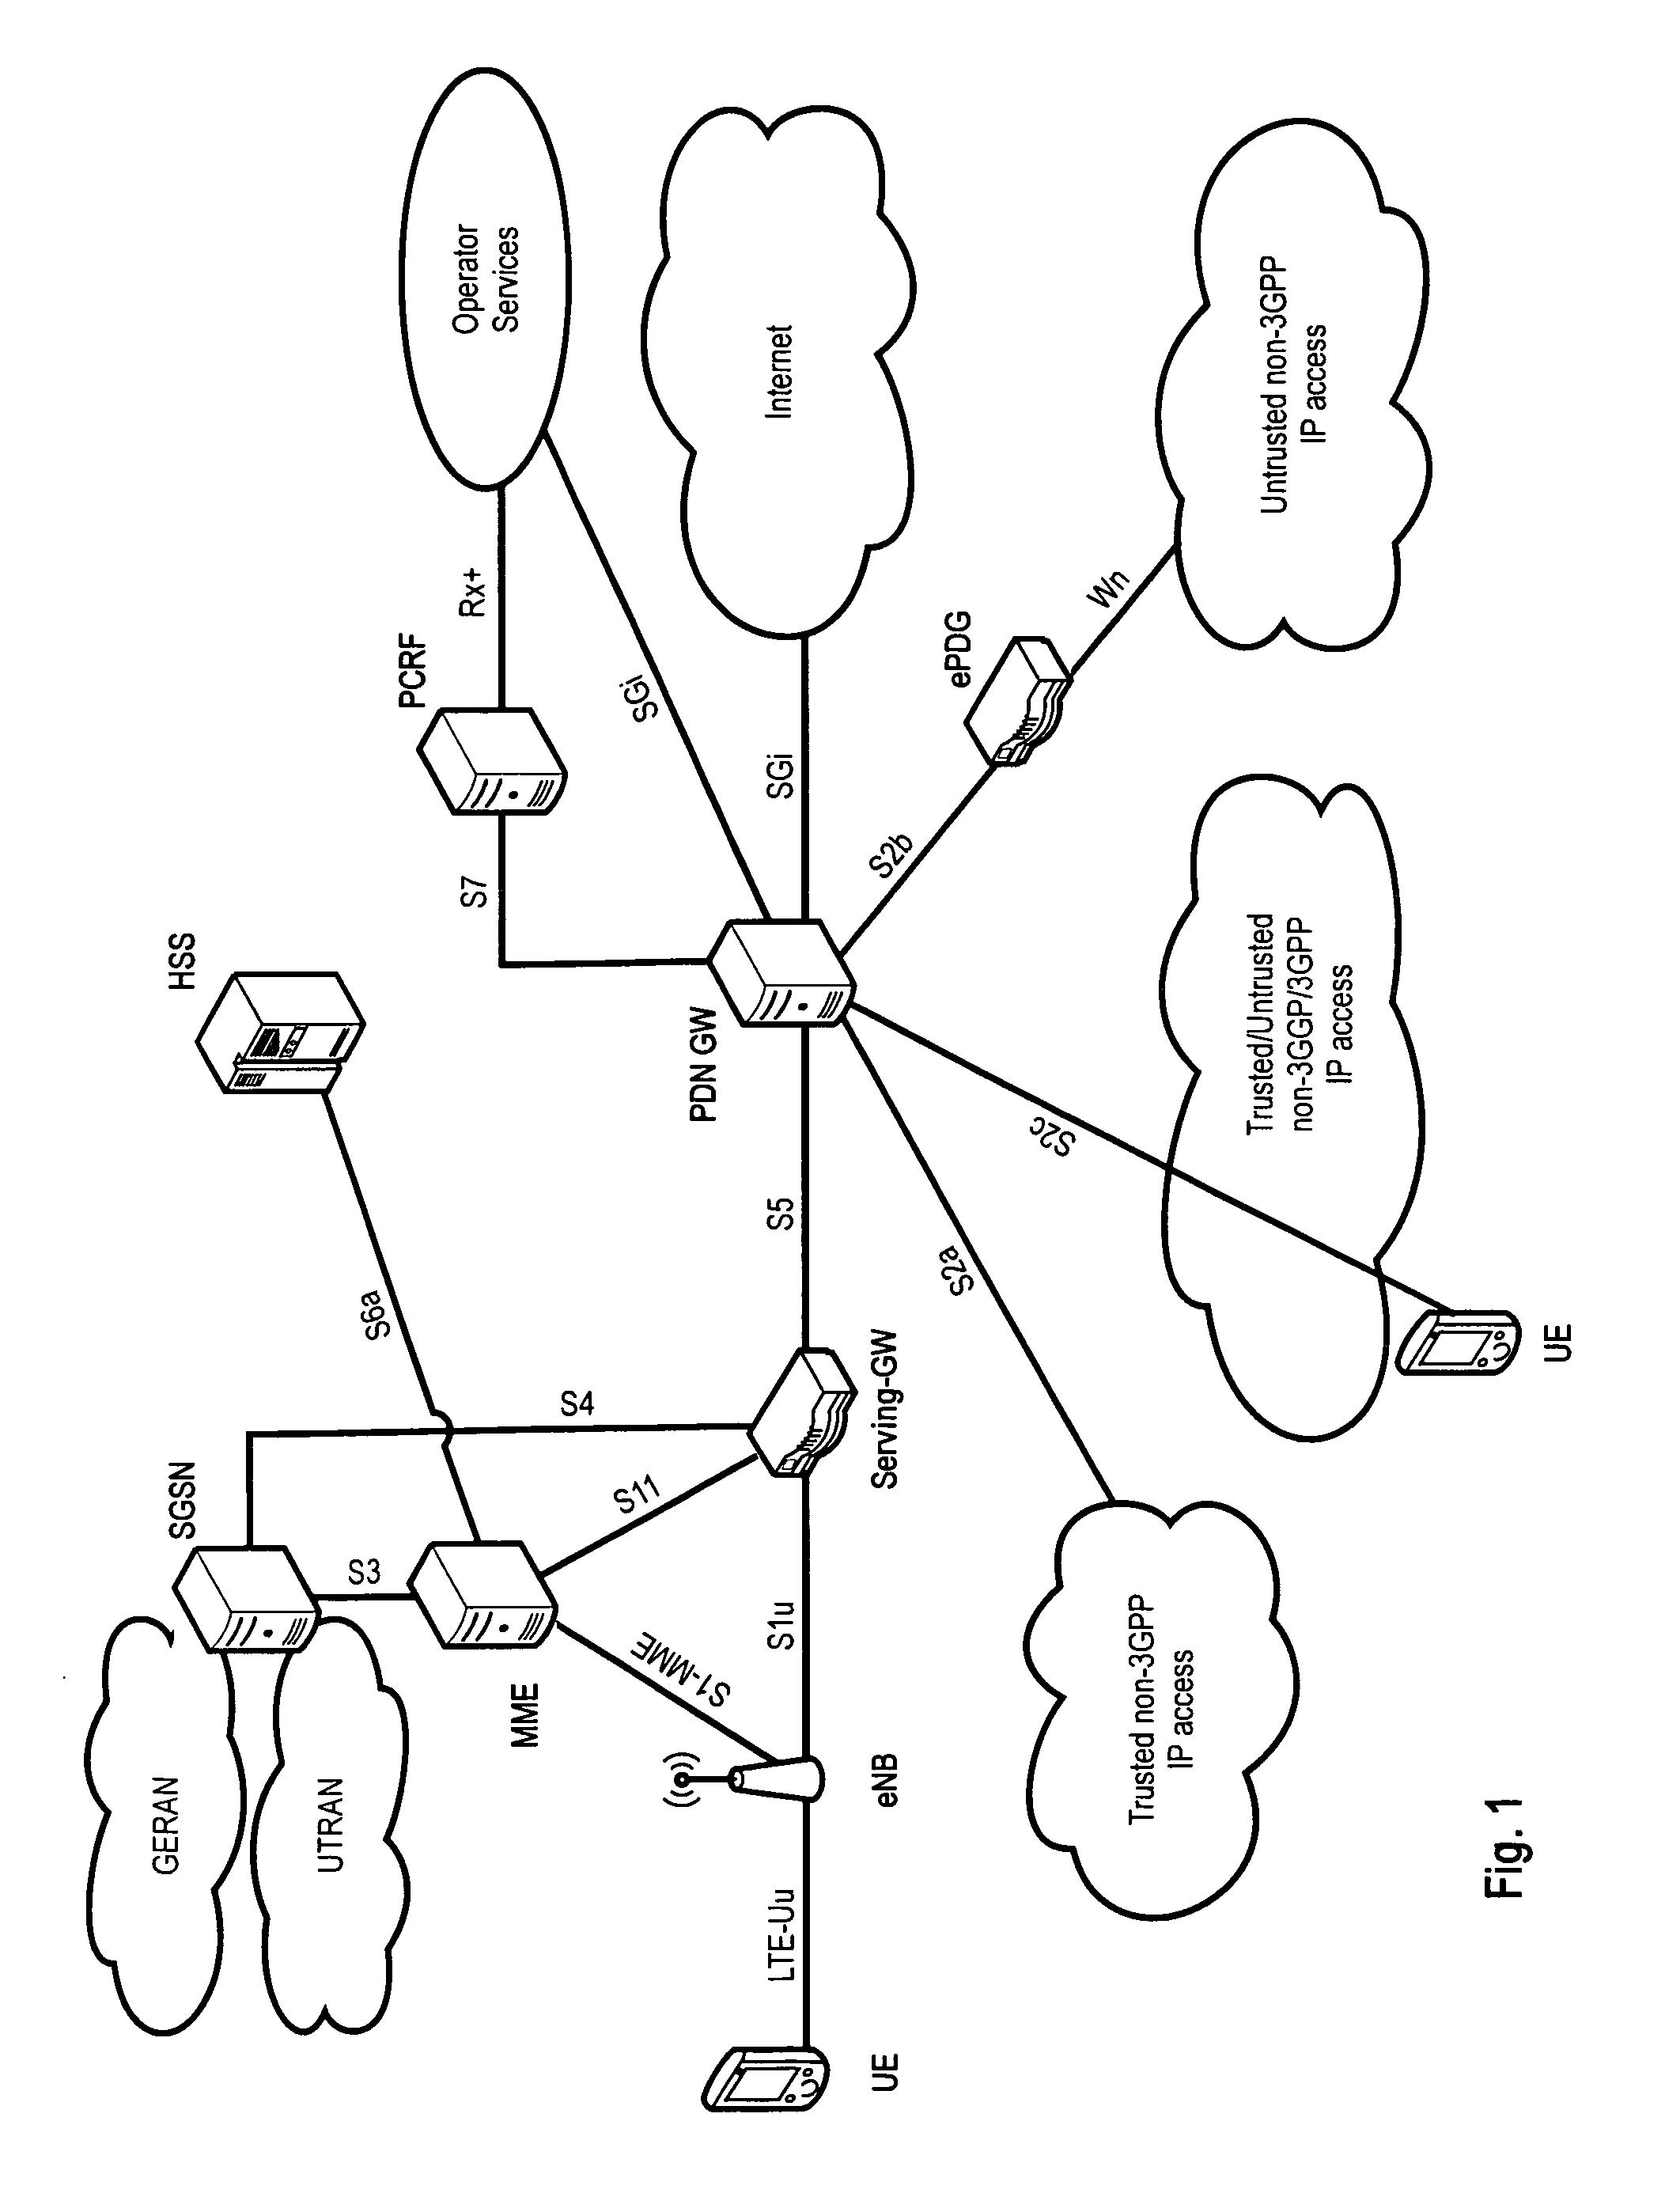 Channel quality reporting in a mobile communication system